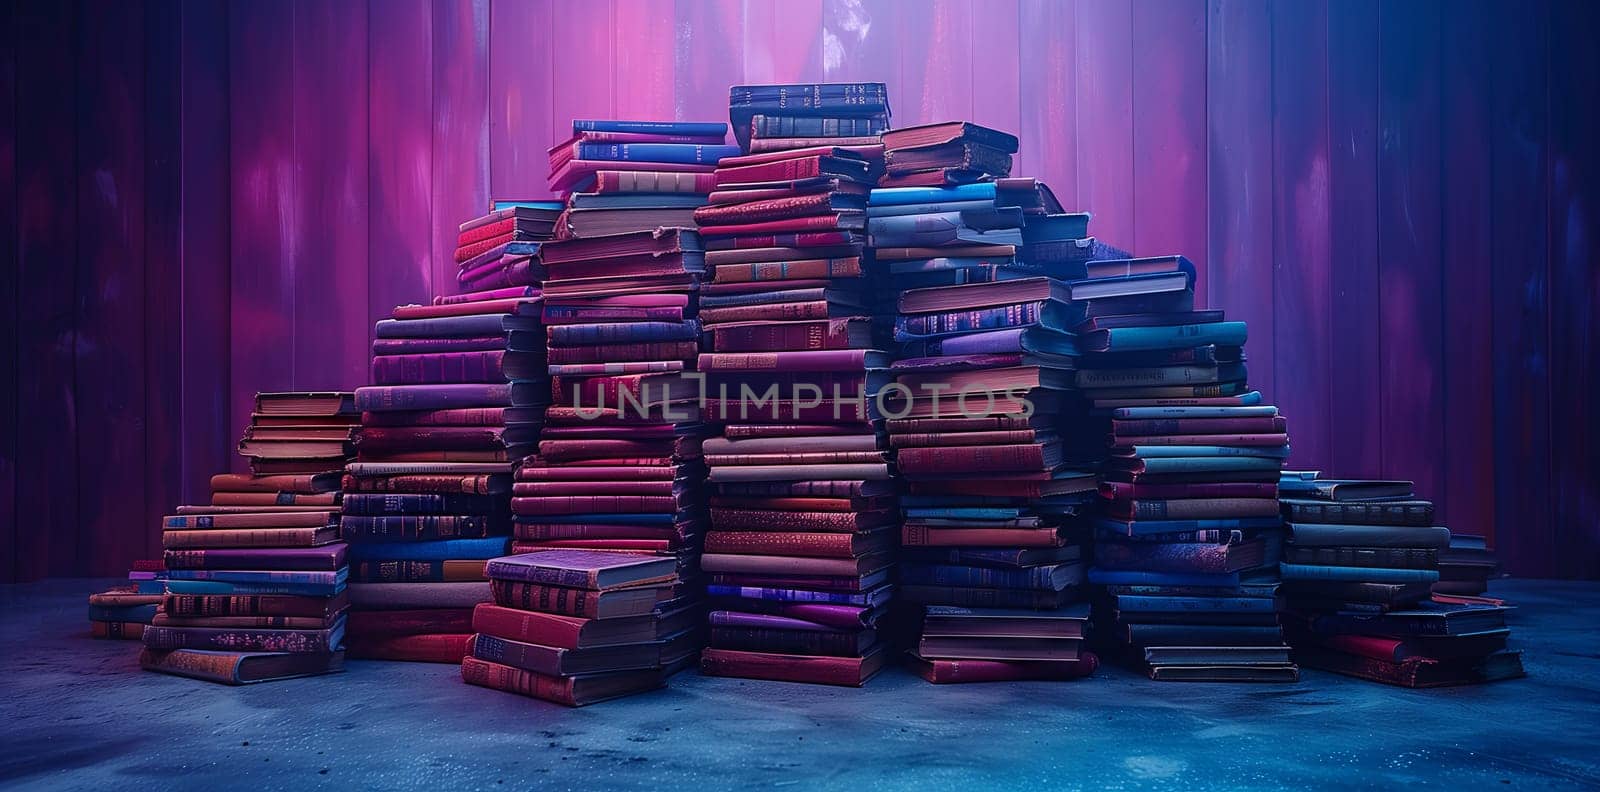 A stack of books in various shades of purple and pink creating a colorful display in a dimly lit room, resembling a piece of art in the darkness